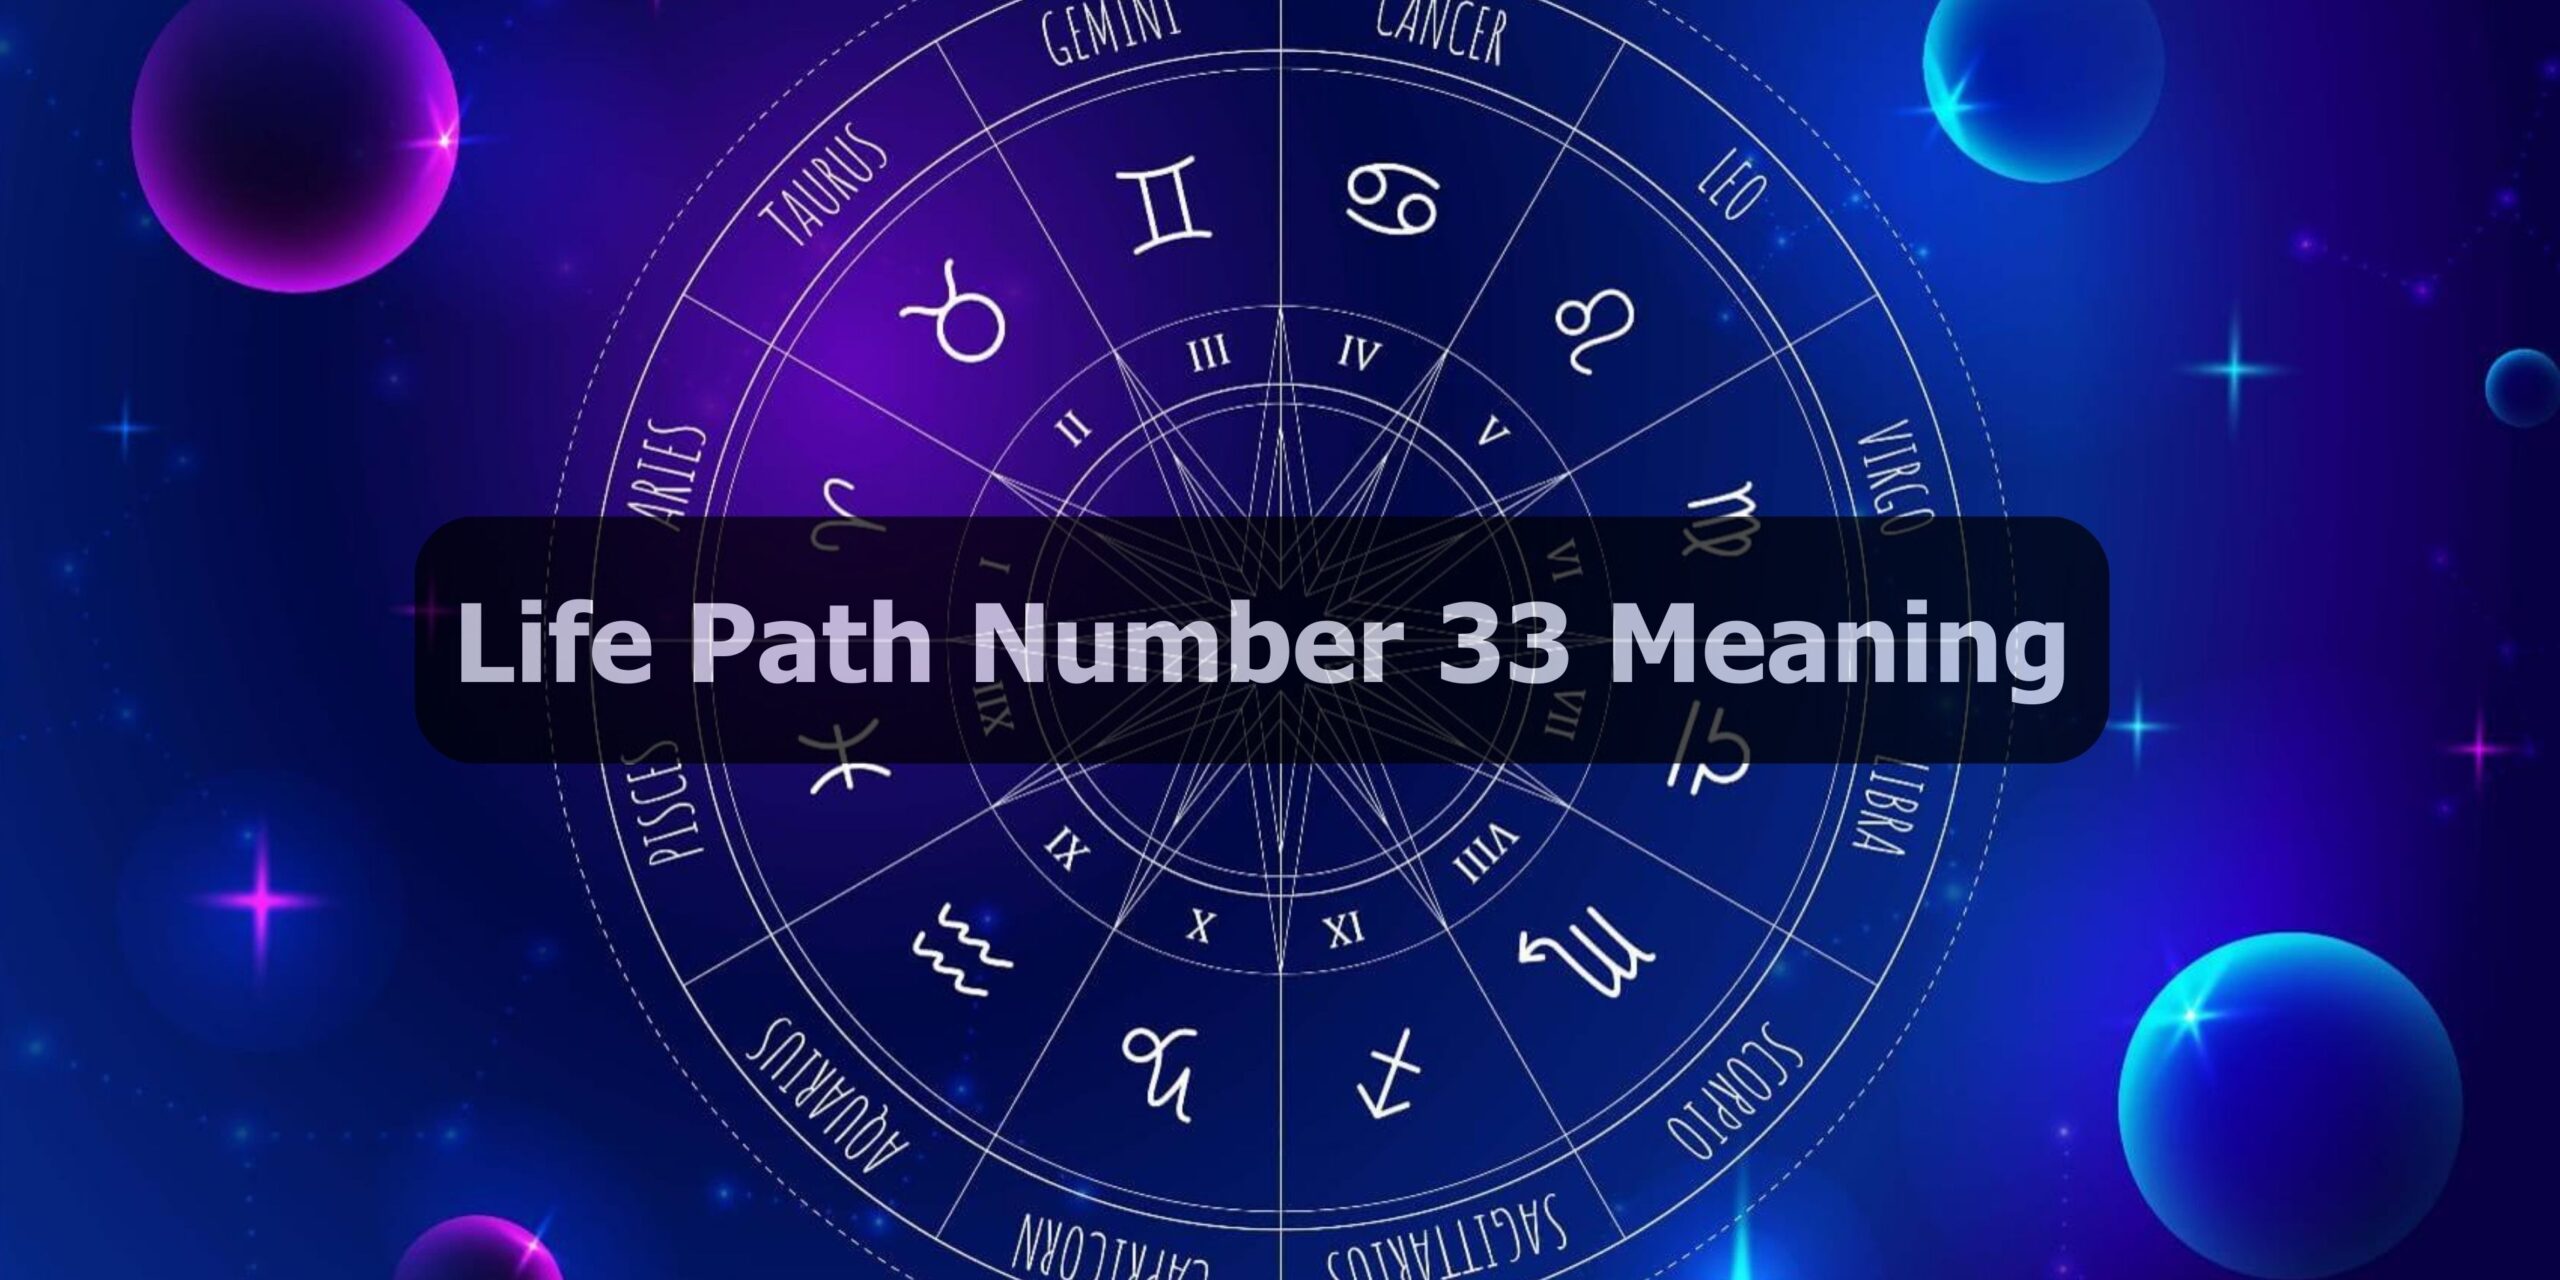 What Does 33 Mean in Numerology